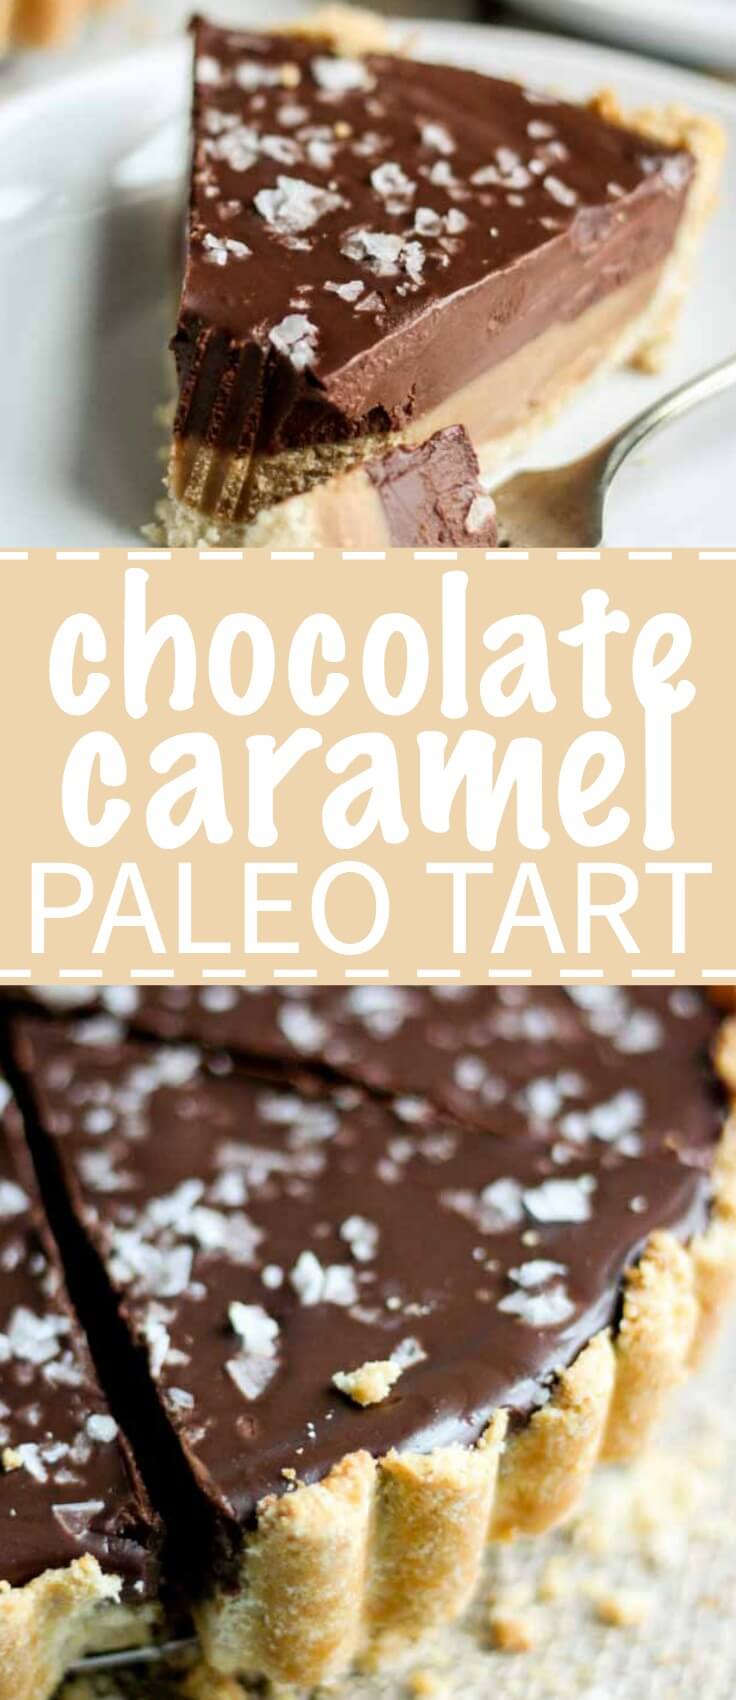 This chocolate caramel tart is paleo, gluten-free and vegan. Aka no refined sugar, no grains no unhealthy fats and yet, it has all the flavor and them some.